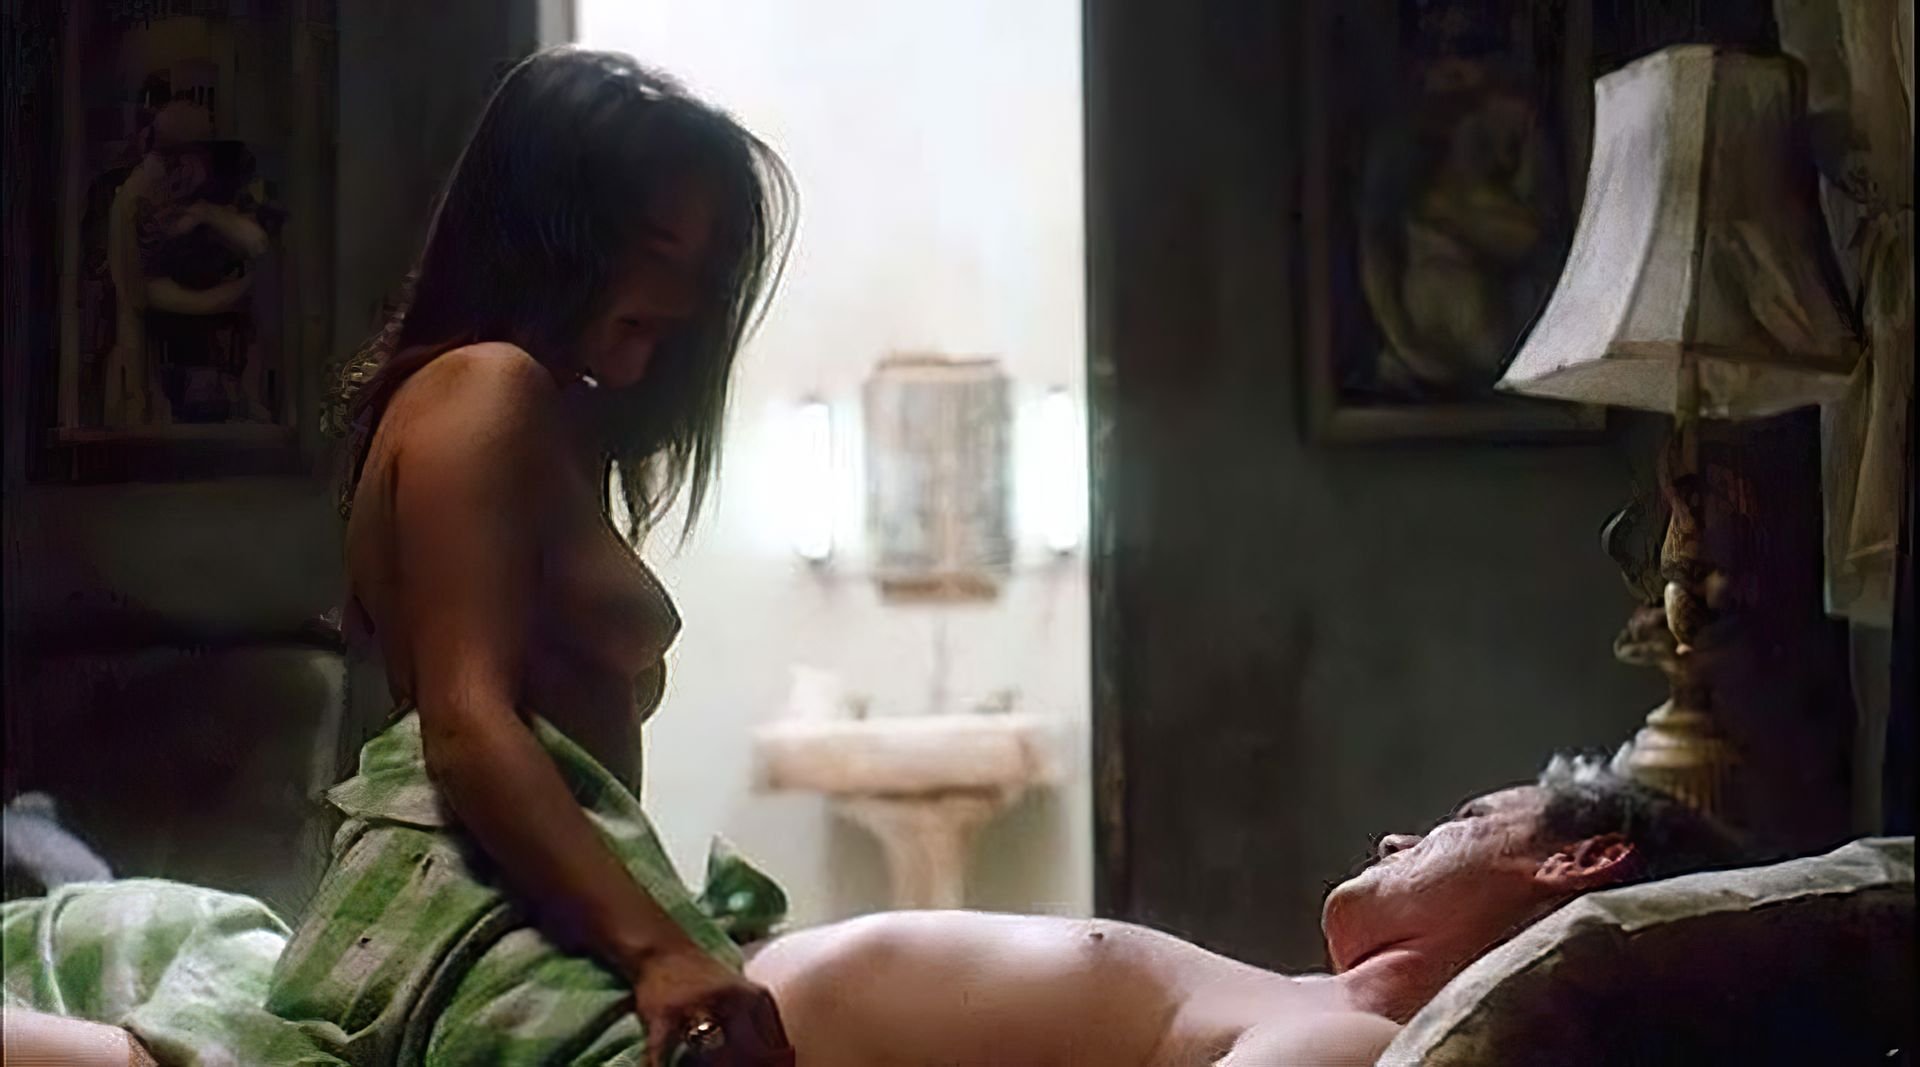 Watch another one Leslie Bega’s nude scene from "Uncaged" (aka An...